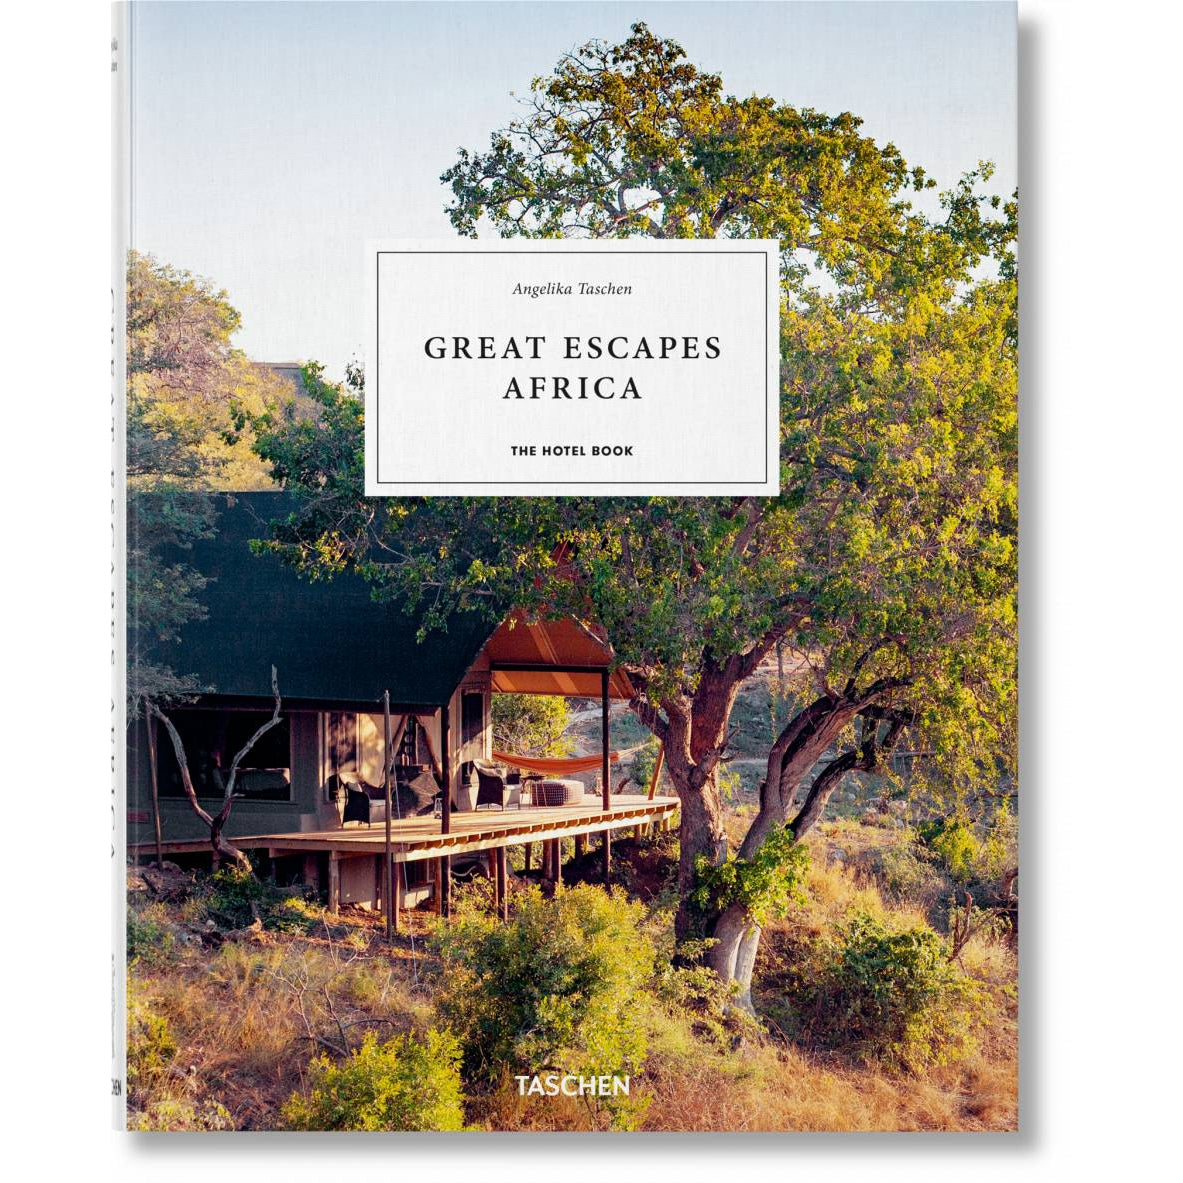 Great Escapes Africa